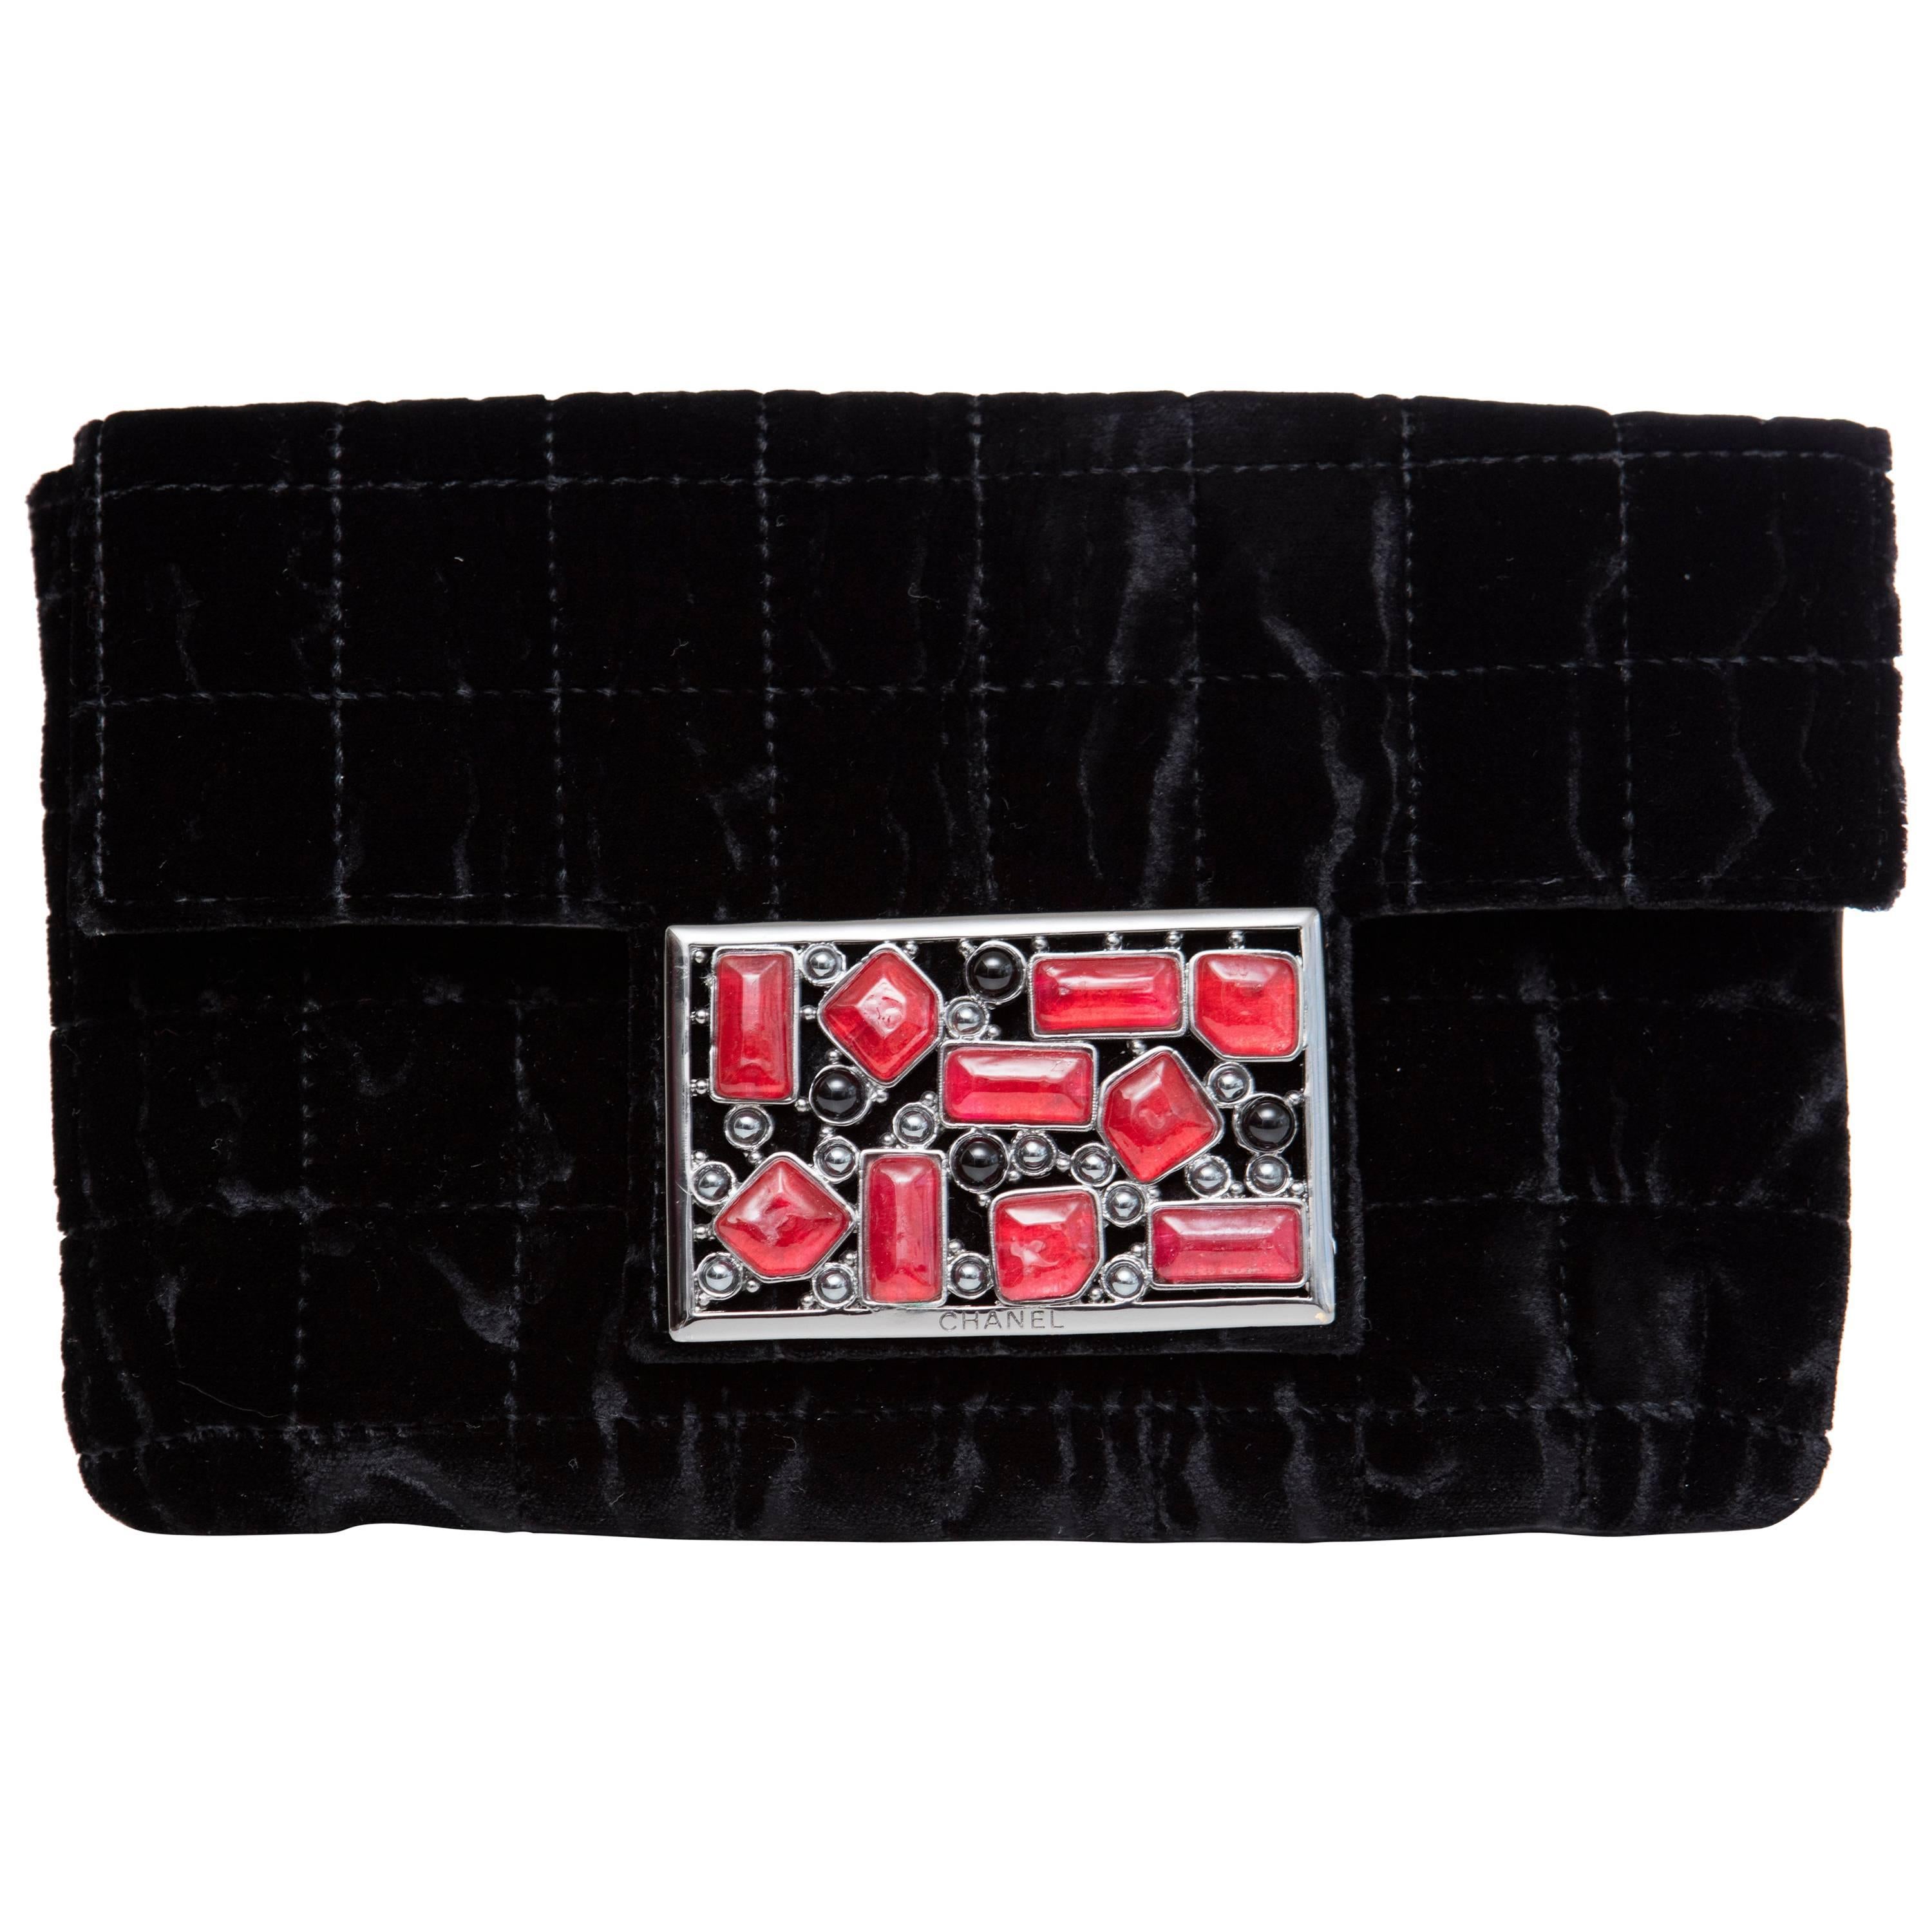 Chanel Black Quilted Velvet Evening Clutch With Gripoix Magnetic Snap Closure For Sale